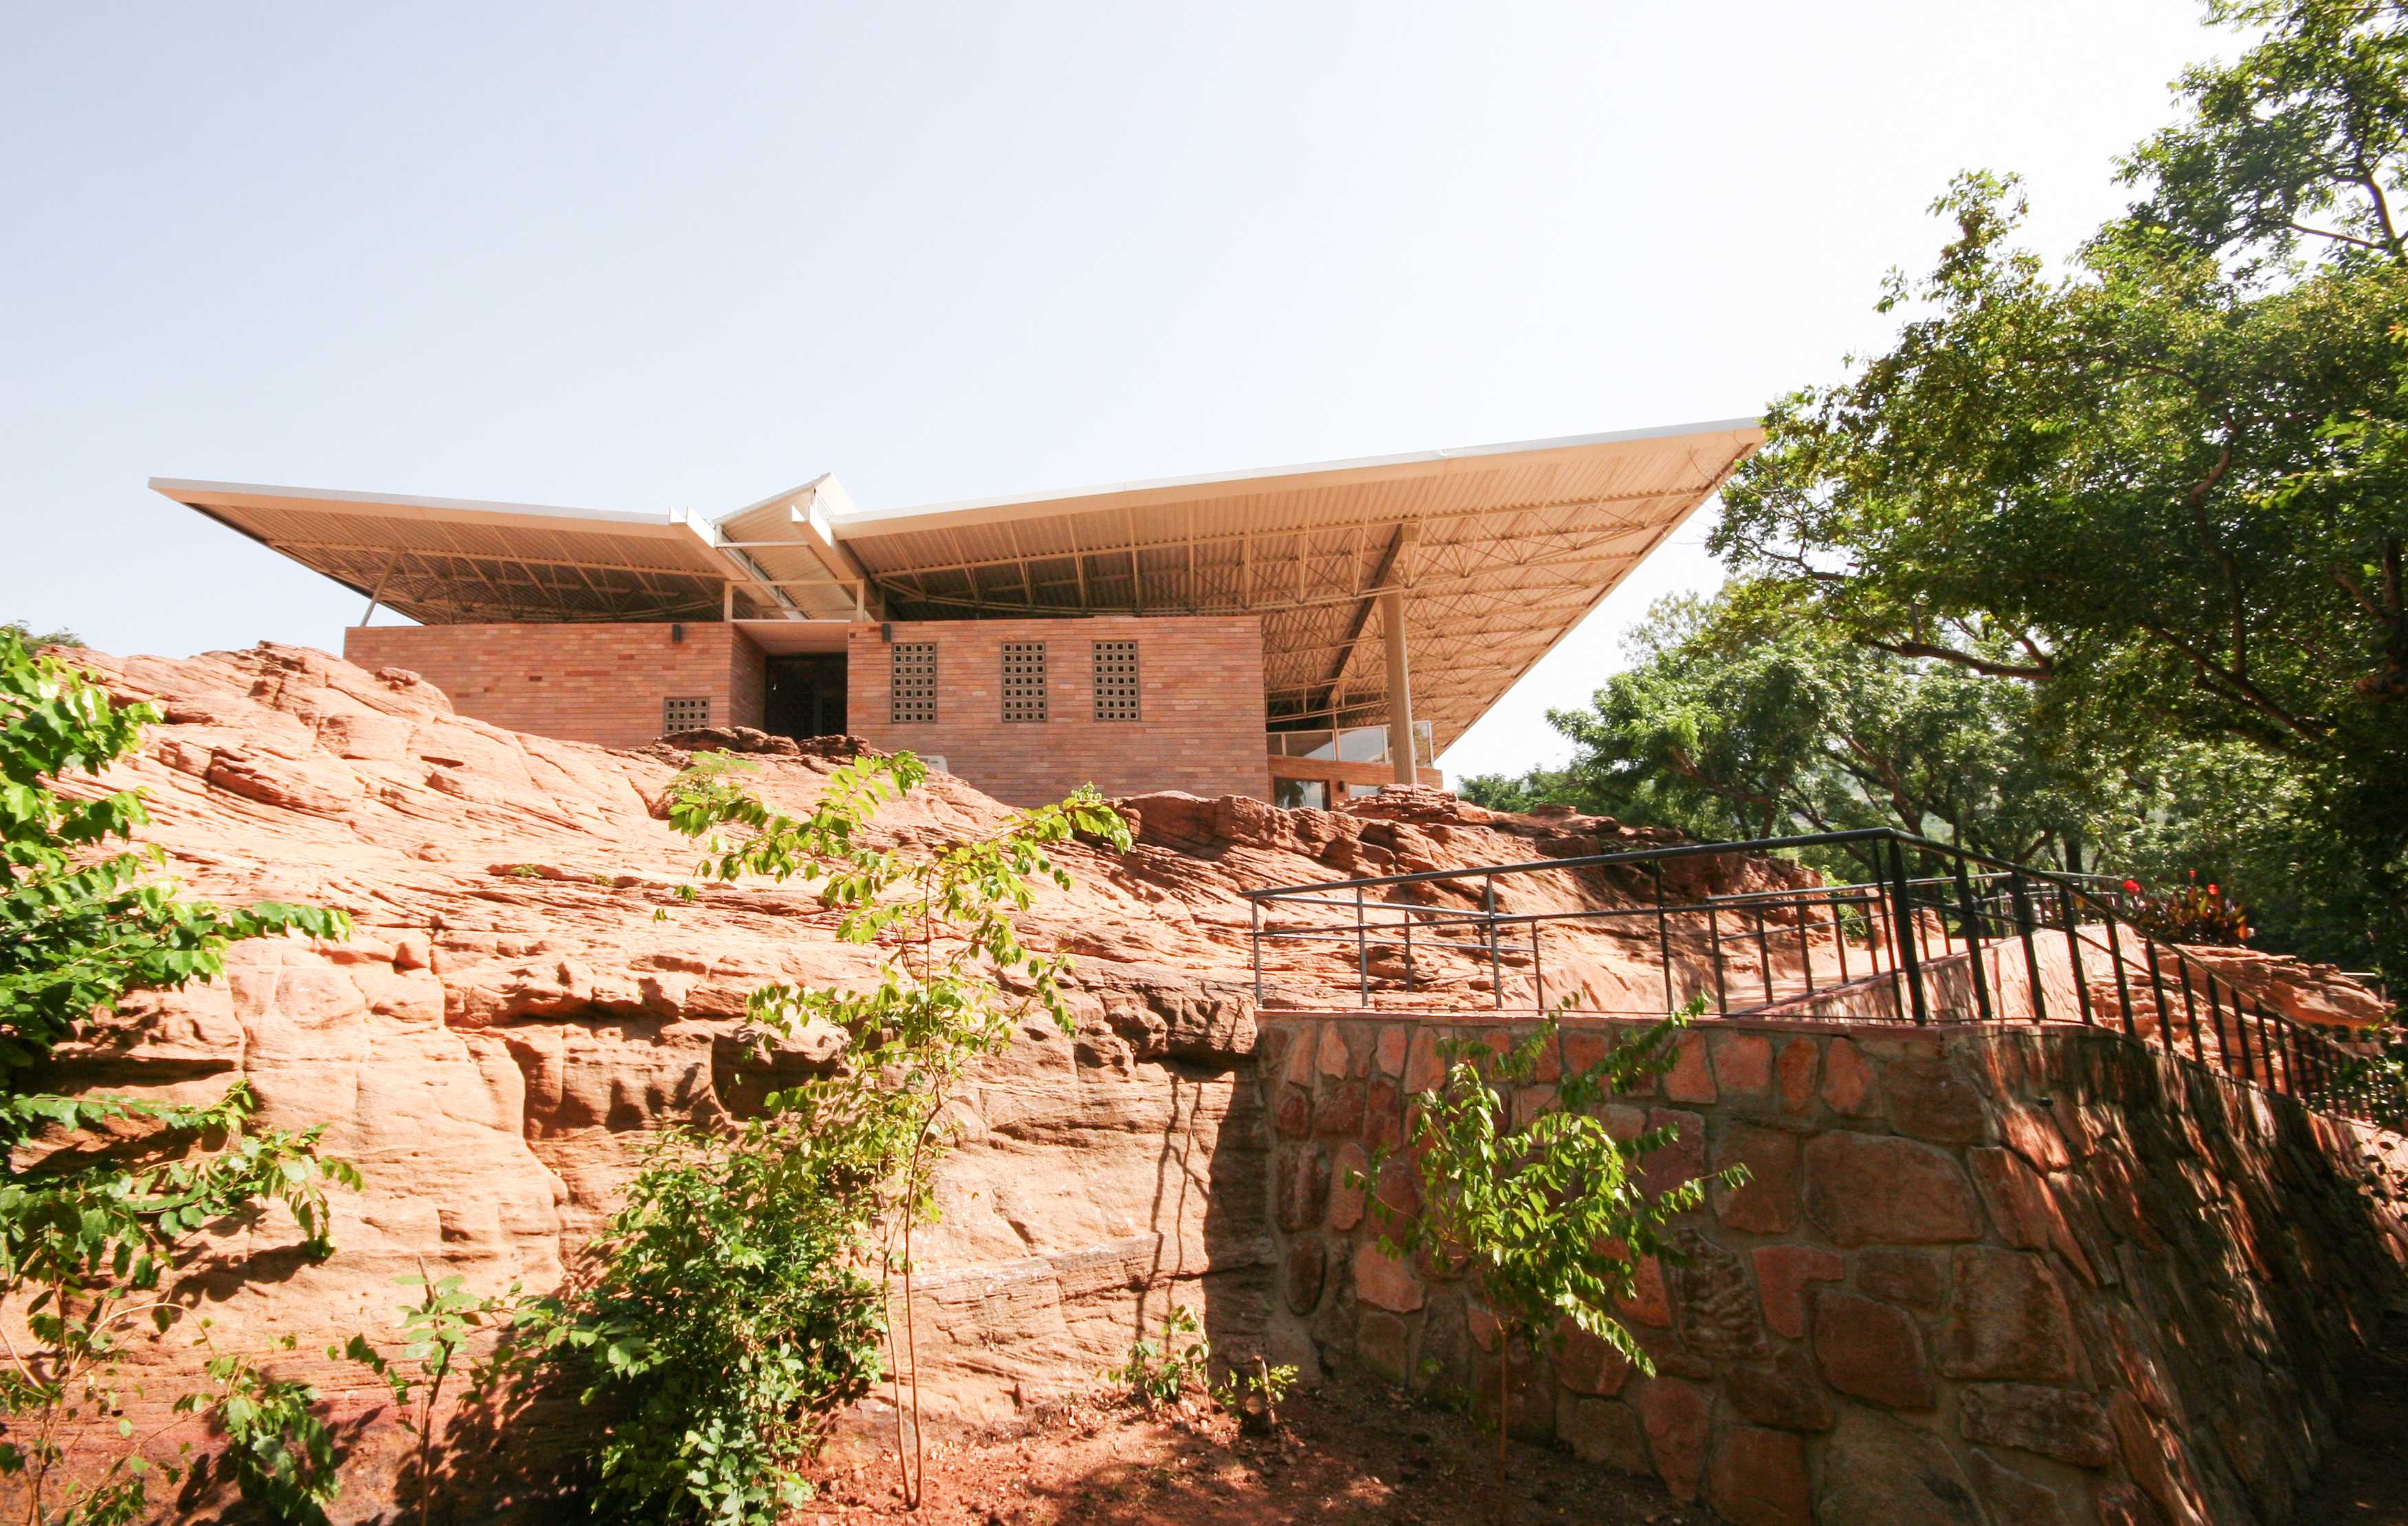 Within the National Park of Mali, a small stone build sits within the terrain with an oversized roof.